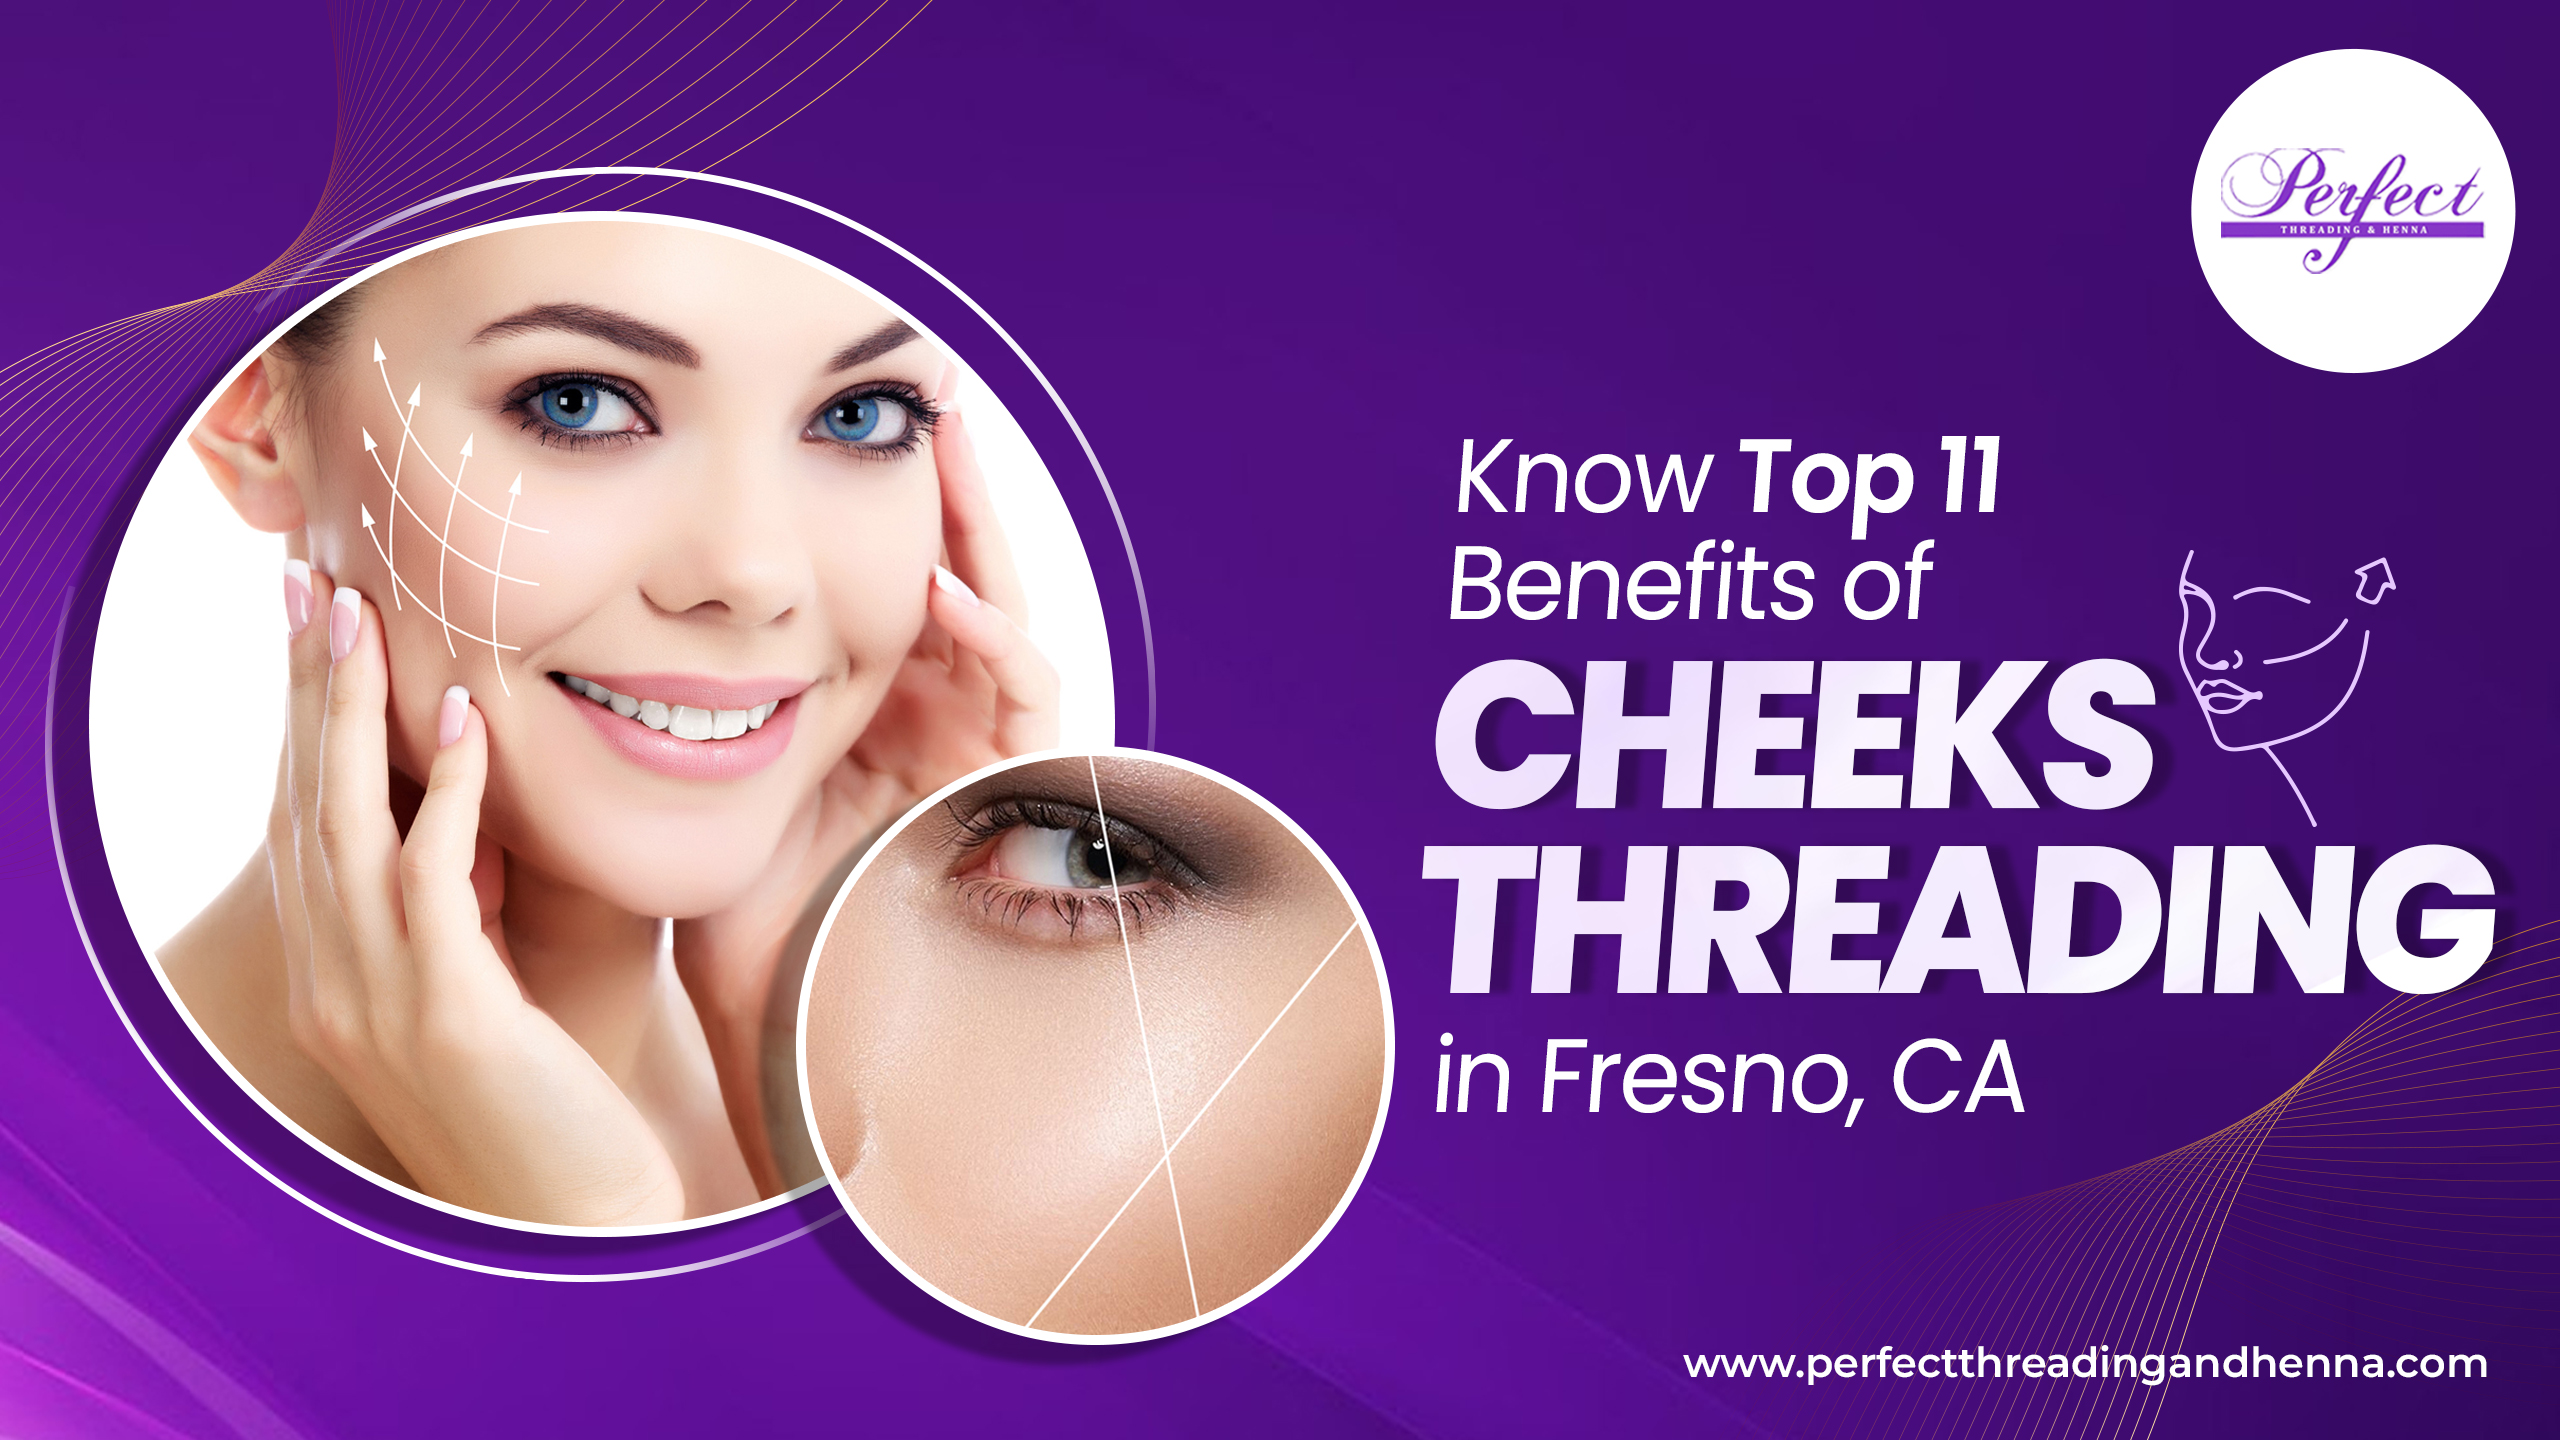 Know Top 11 Benefits of Cheeks Threading in Fresno, CA